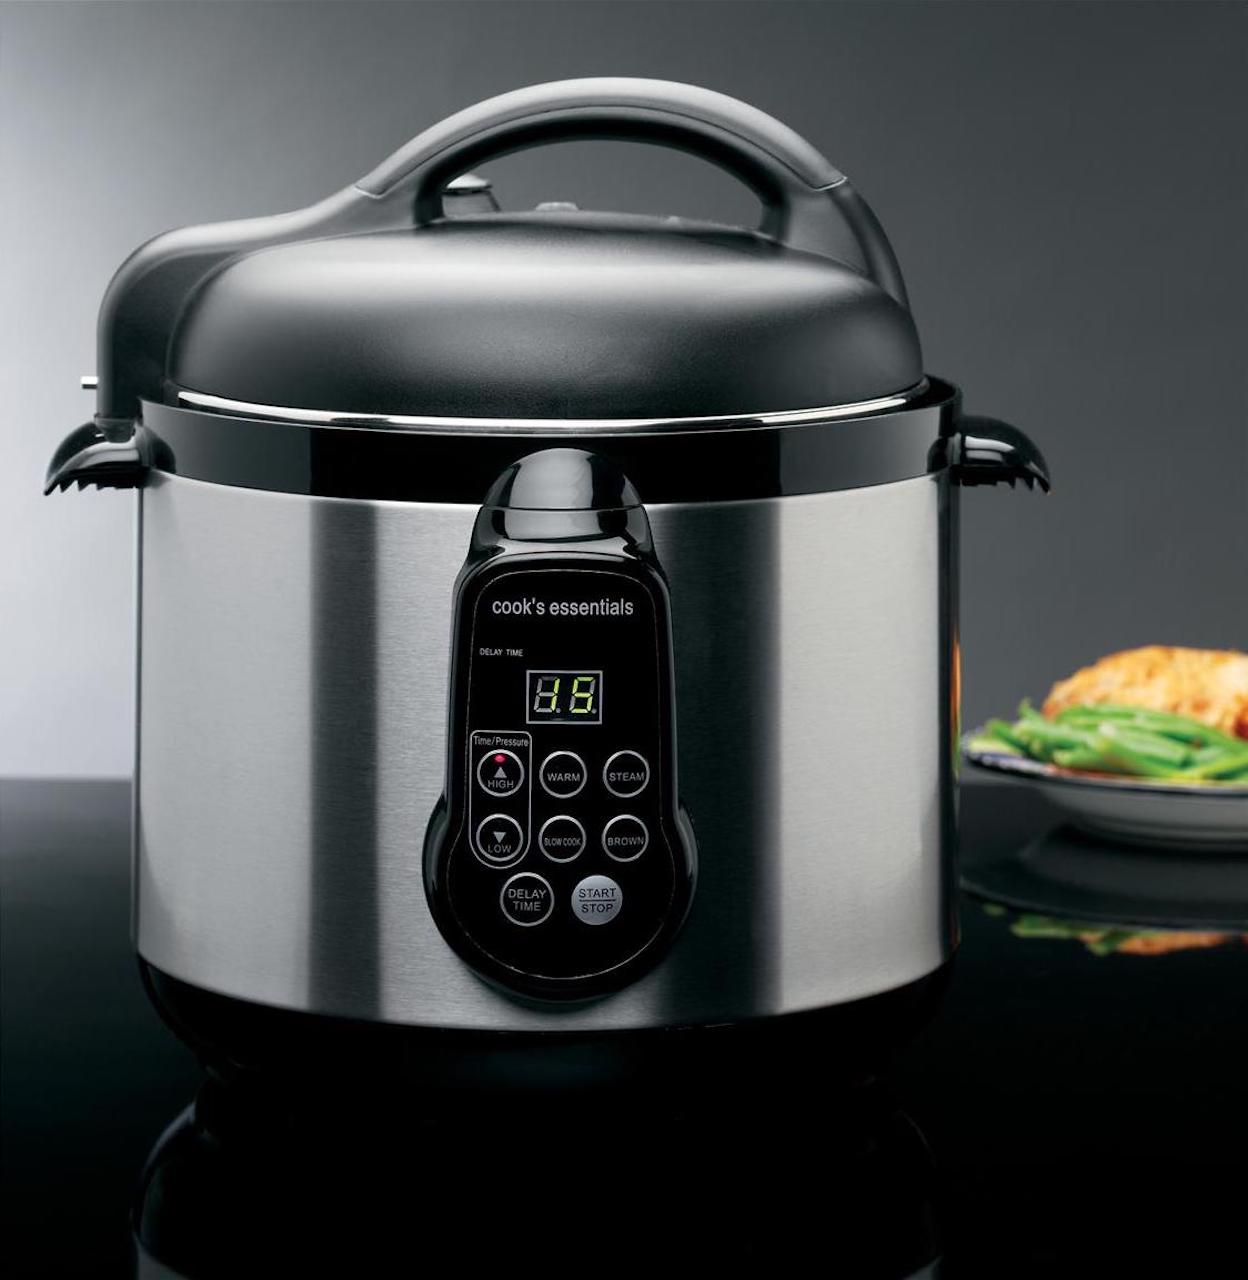 Zavor LUX Edge, 4 Quart Programmable Electric Multi-Cooker: Pressure  Cooker, Slow Cooker, Rice Cooker, Yogurt Maker, Steamer and more -  Stainless